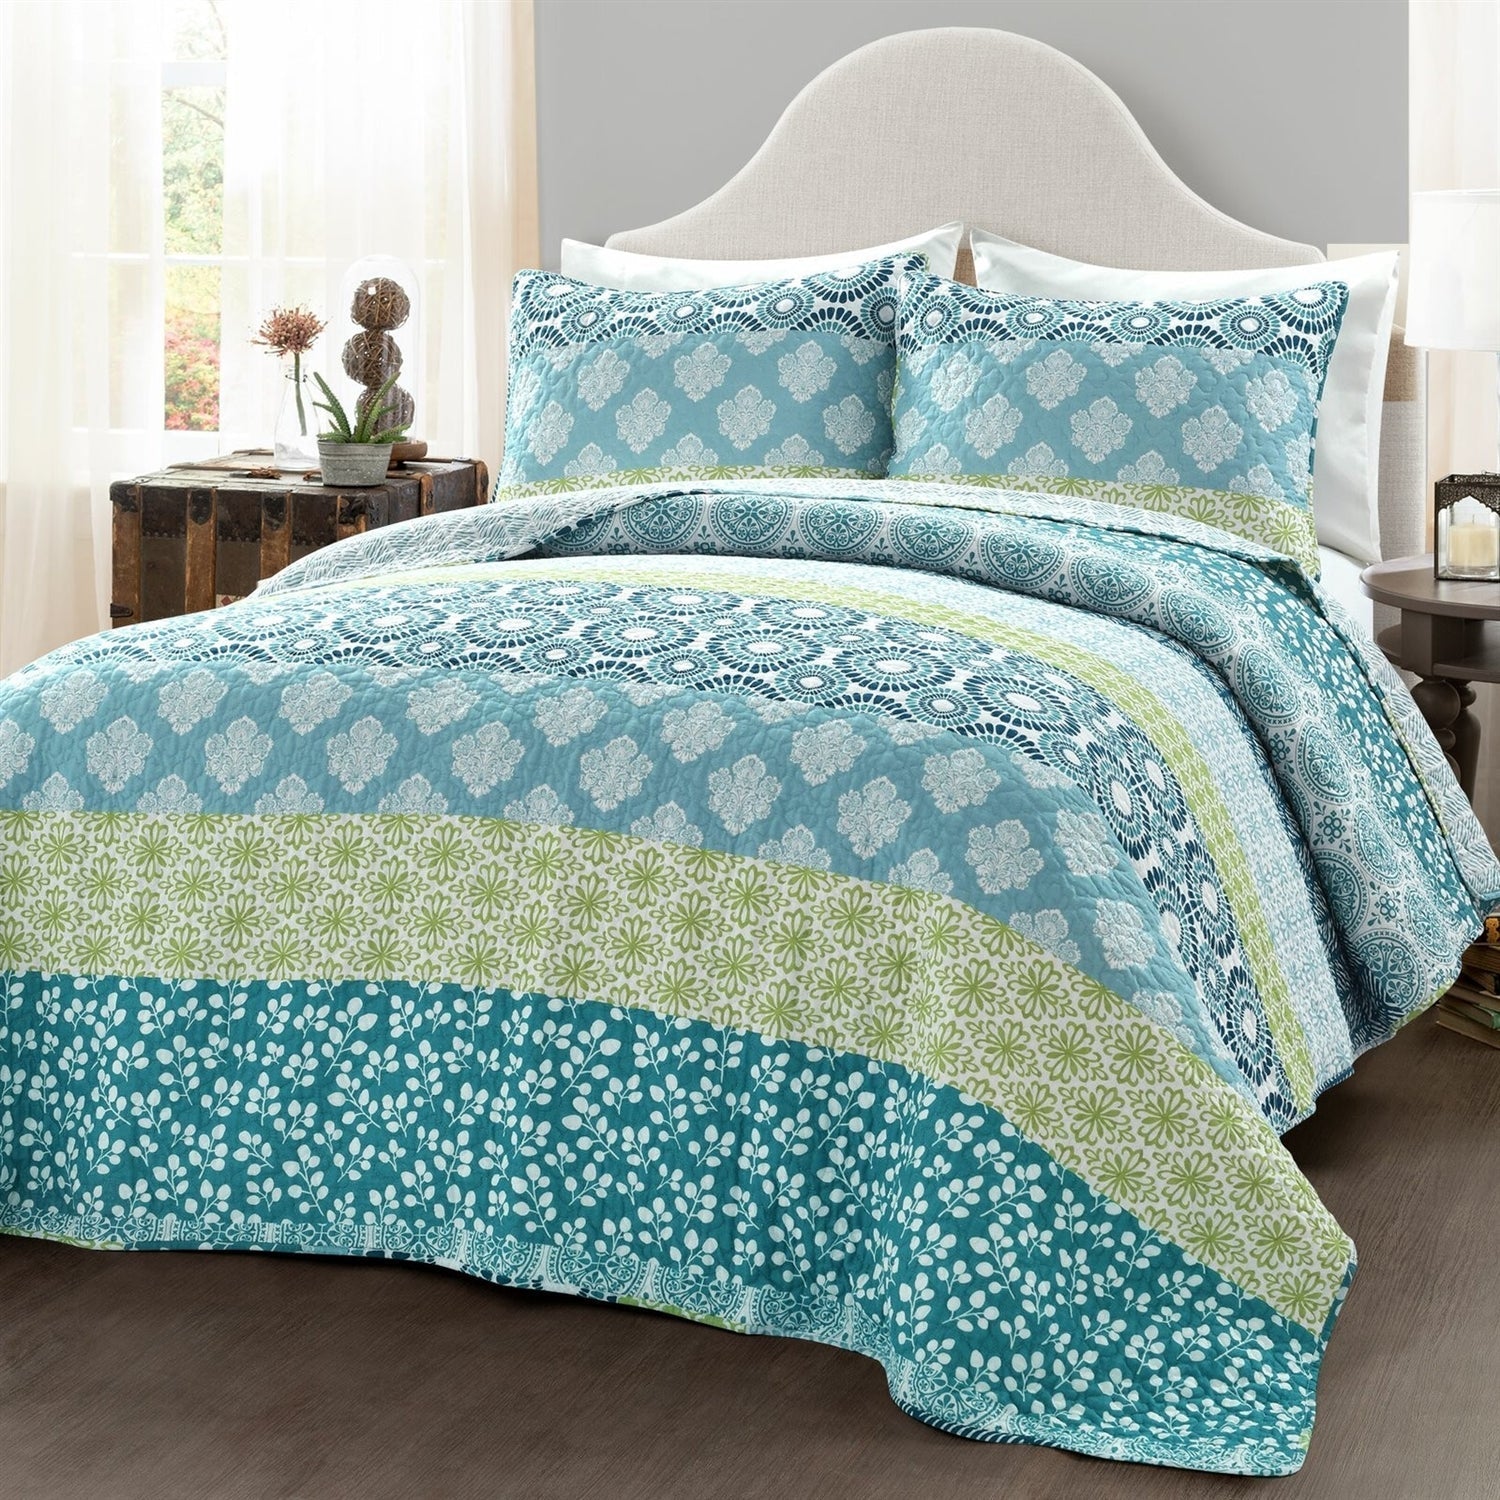 Bedroom > Quilts & Blankets - Full/Queen Cotton 3 Piece Reversible Blue White Green Floral Damask Quilt Set